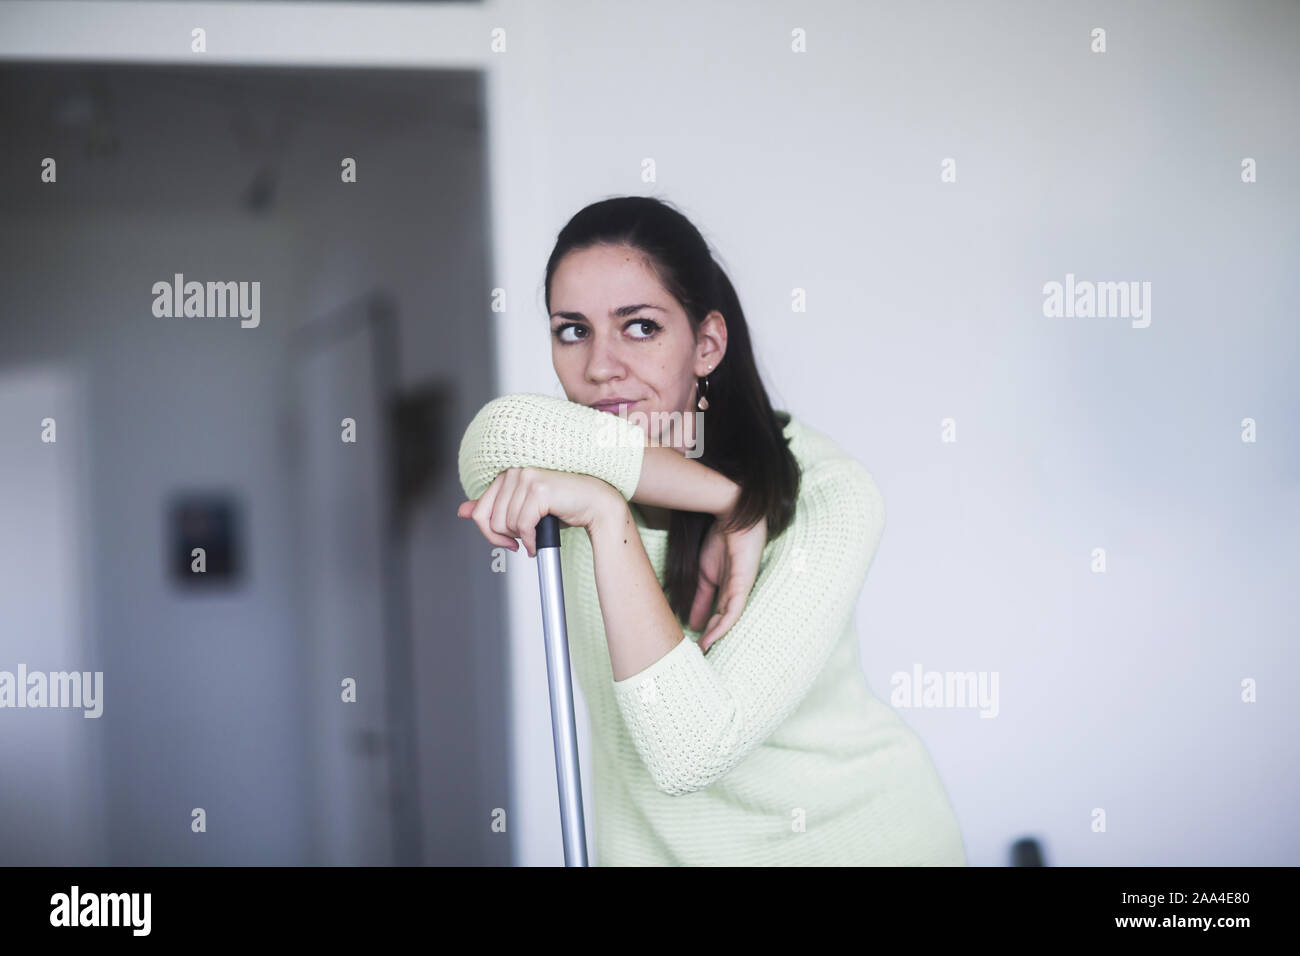 Frustrated woman leaning on a broom Stock Photo